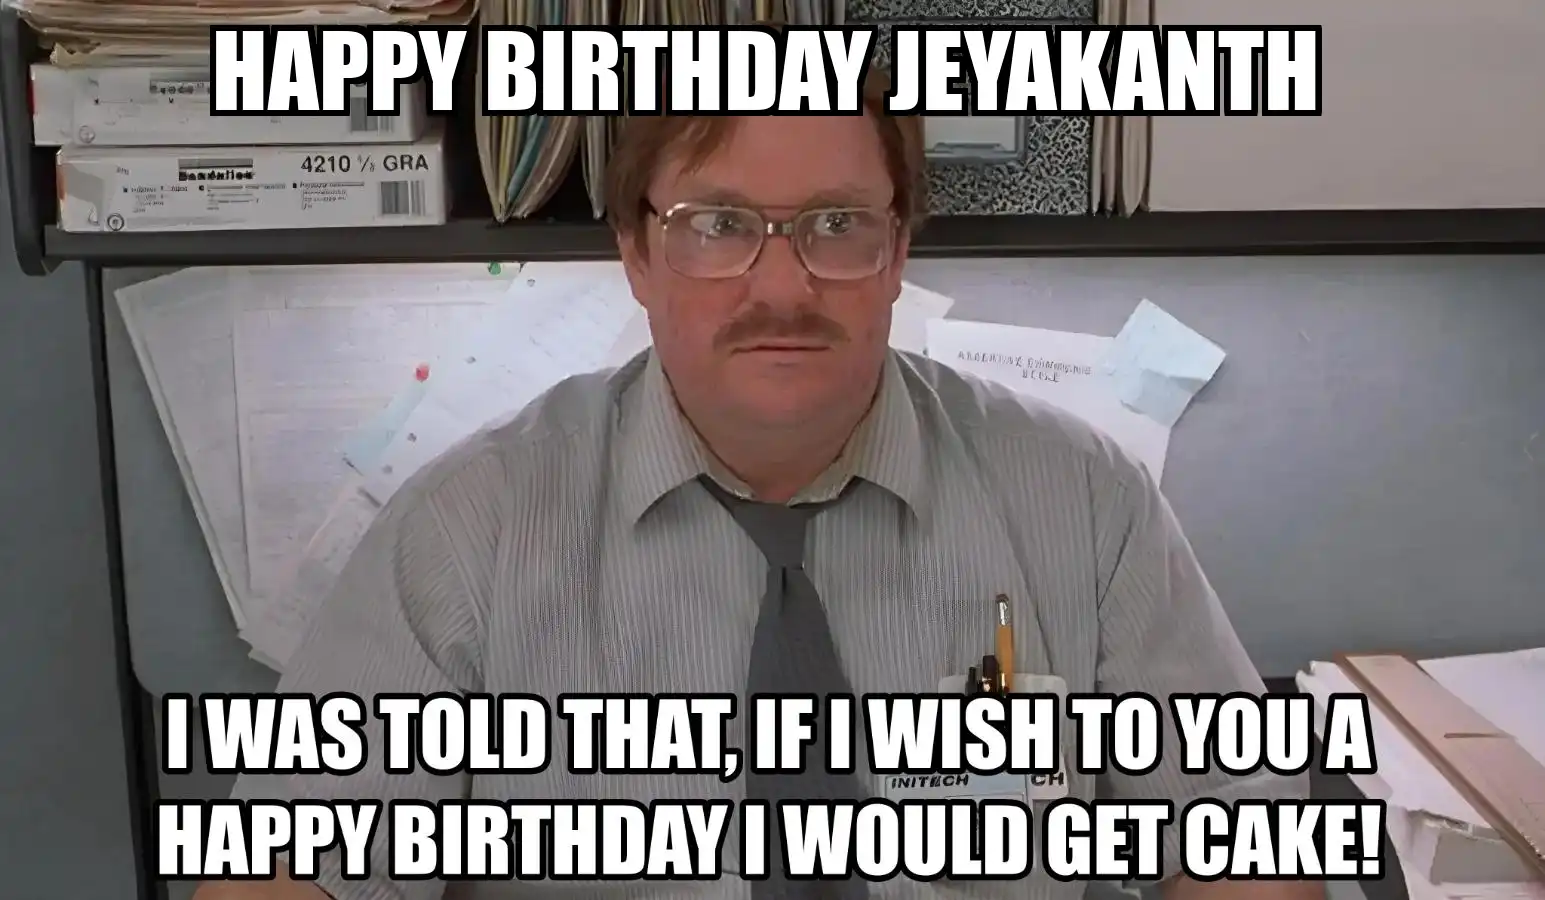 Happy Birthday Jeyakanth I Would Get A Cake Meme